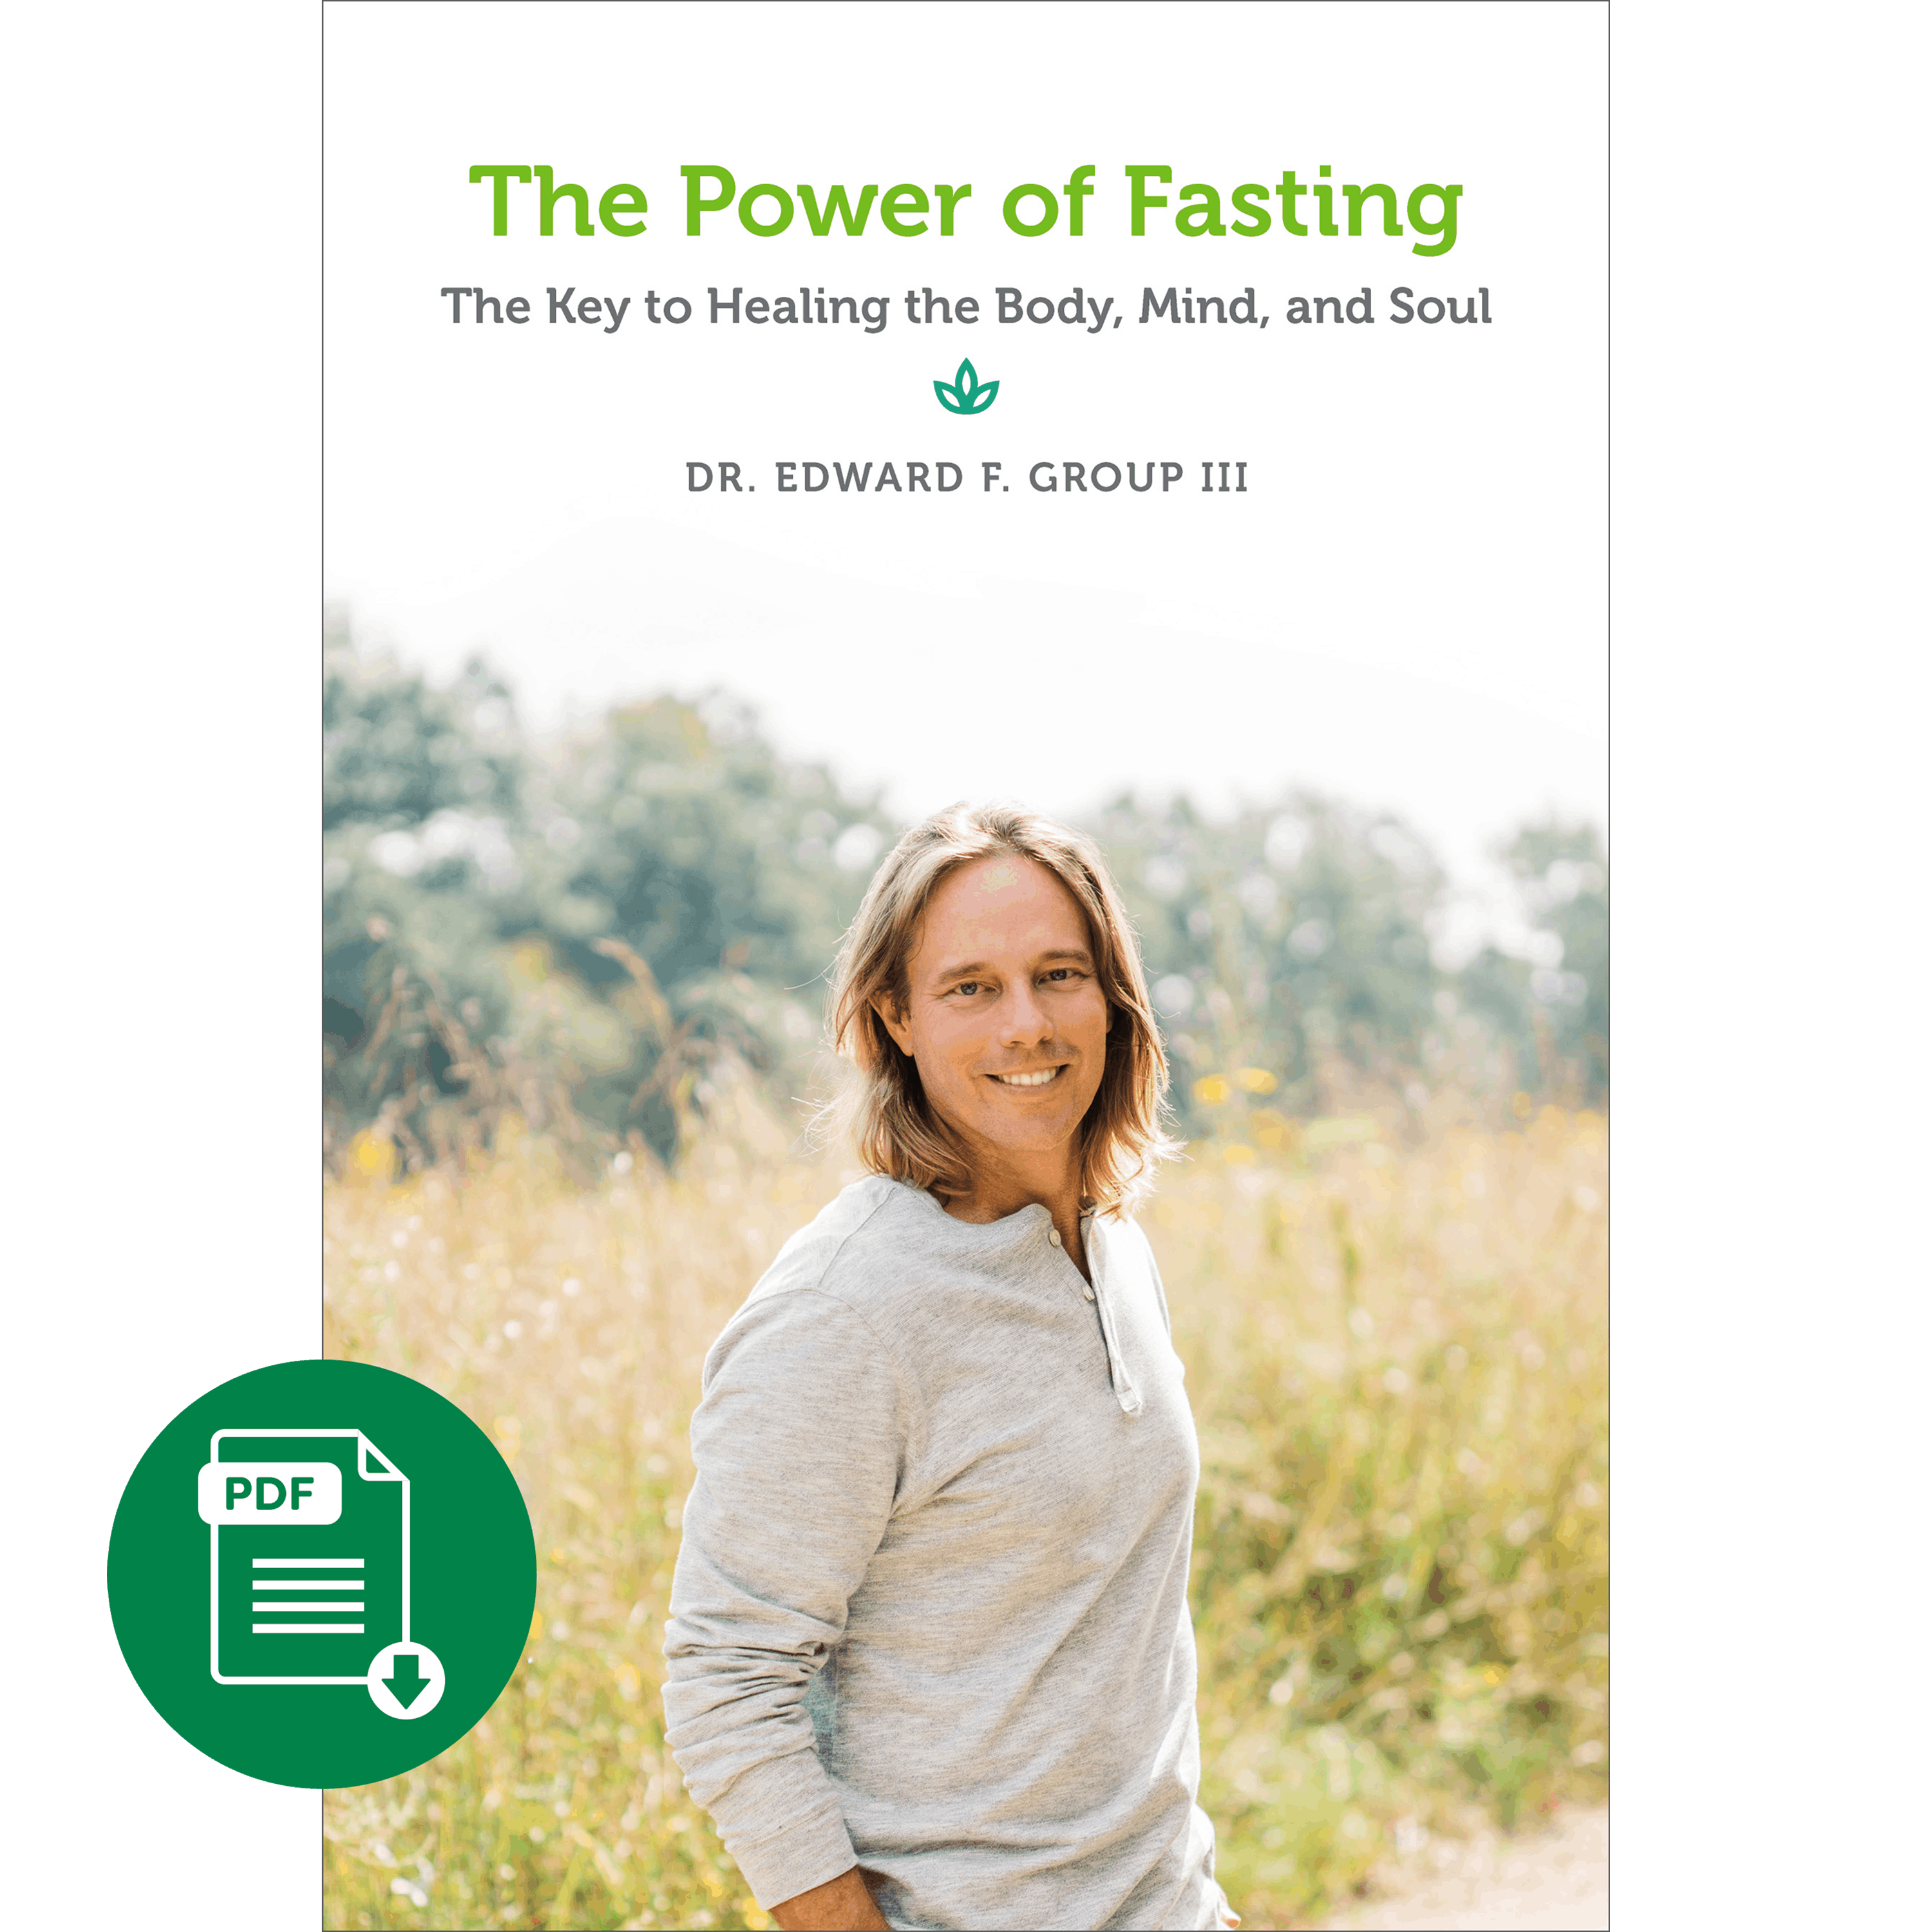 The Power of Fasting by Dr. Edward Group III – Global Healing